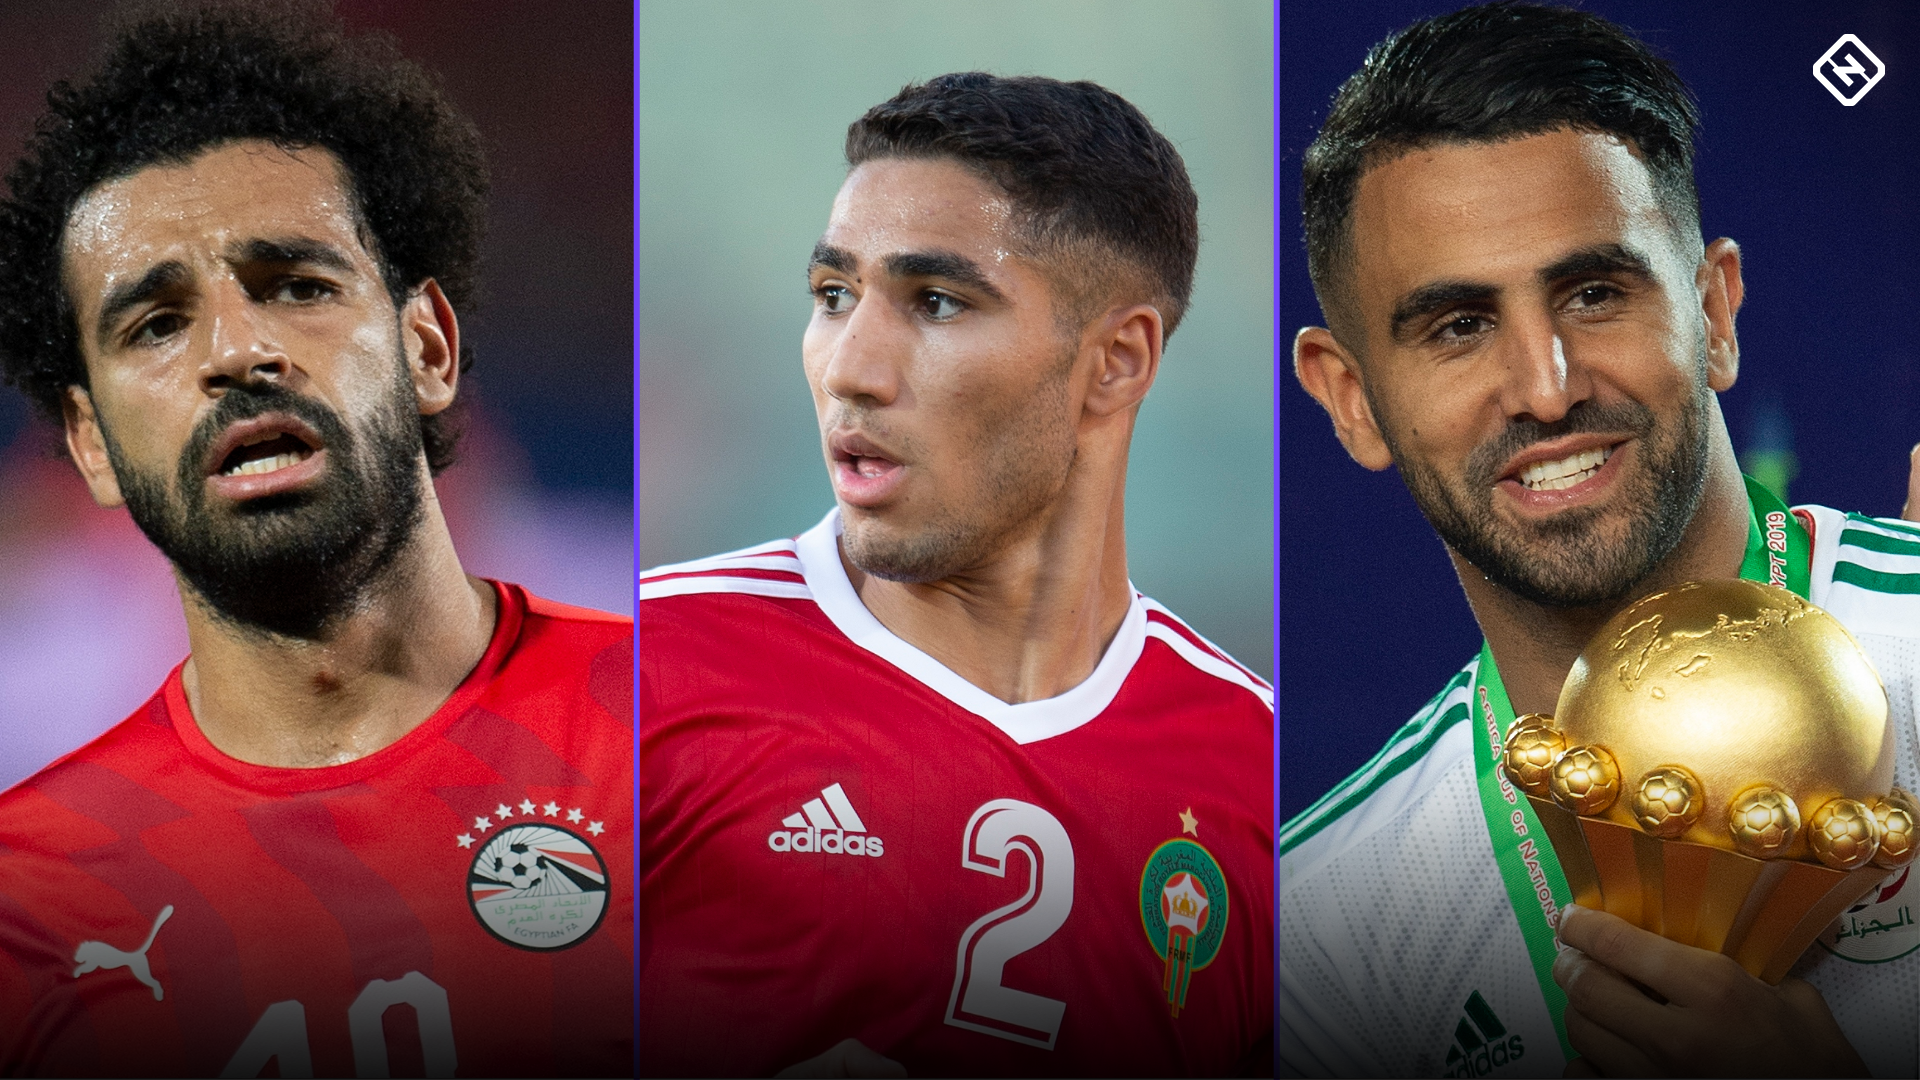 AFCON 2022: Ranking the top 10 players set to star in African championship